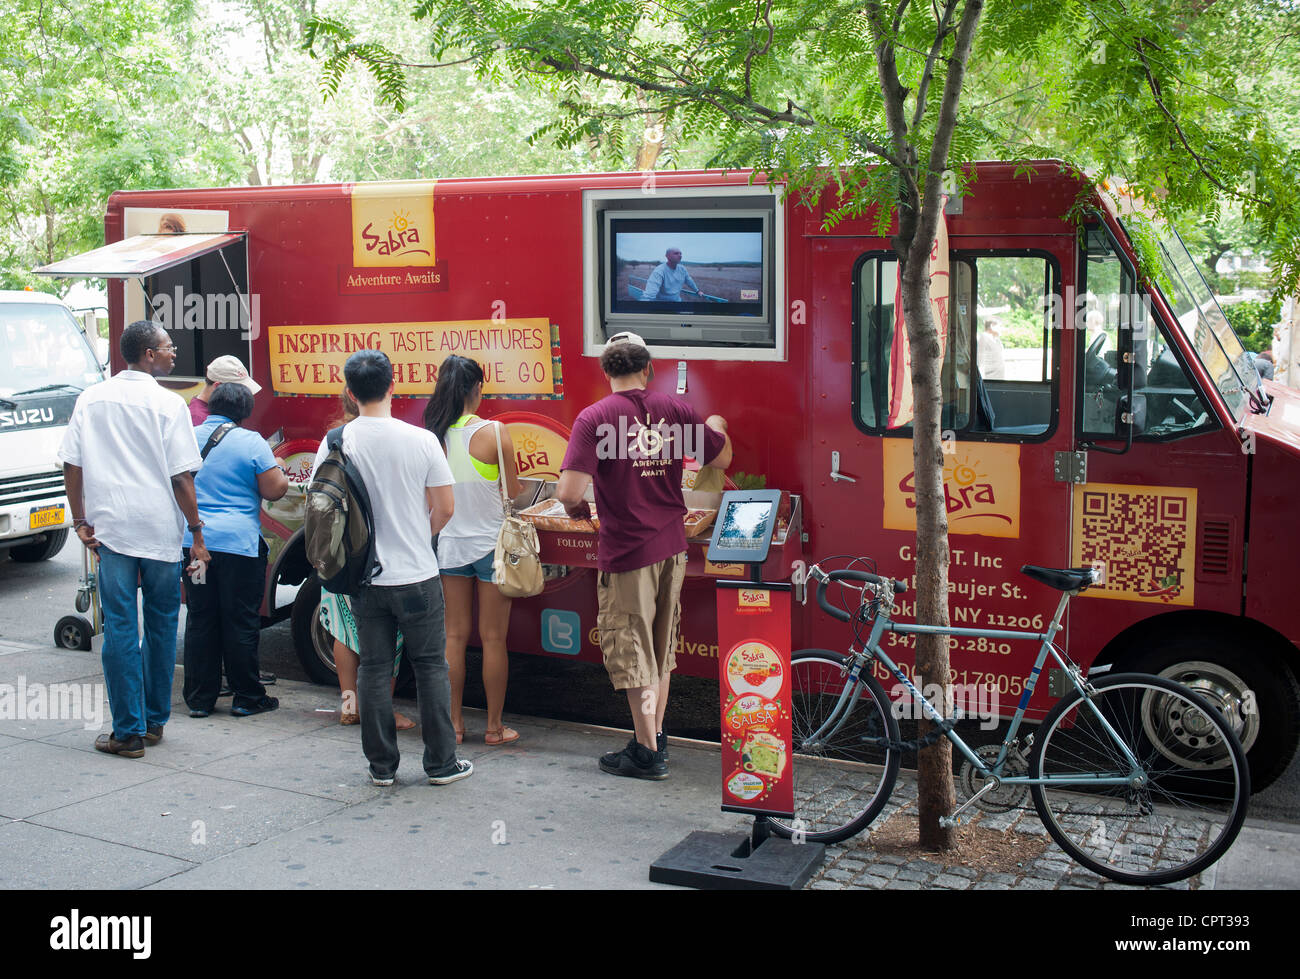 Sabra, a manufacturer of hummus and other middle-eastern foods, uses a truck to give away free samples Stock Photo